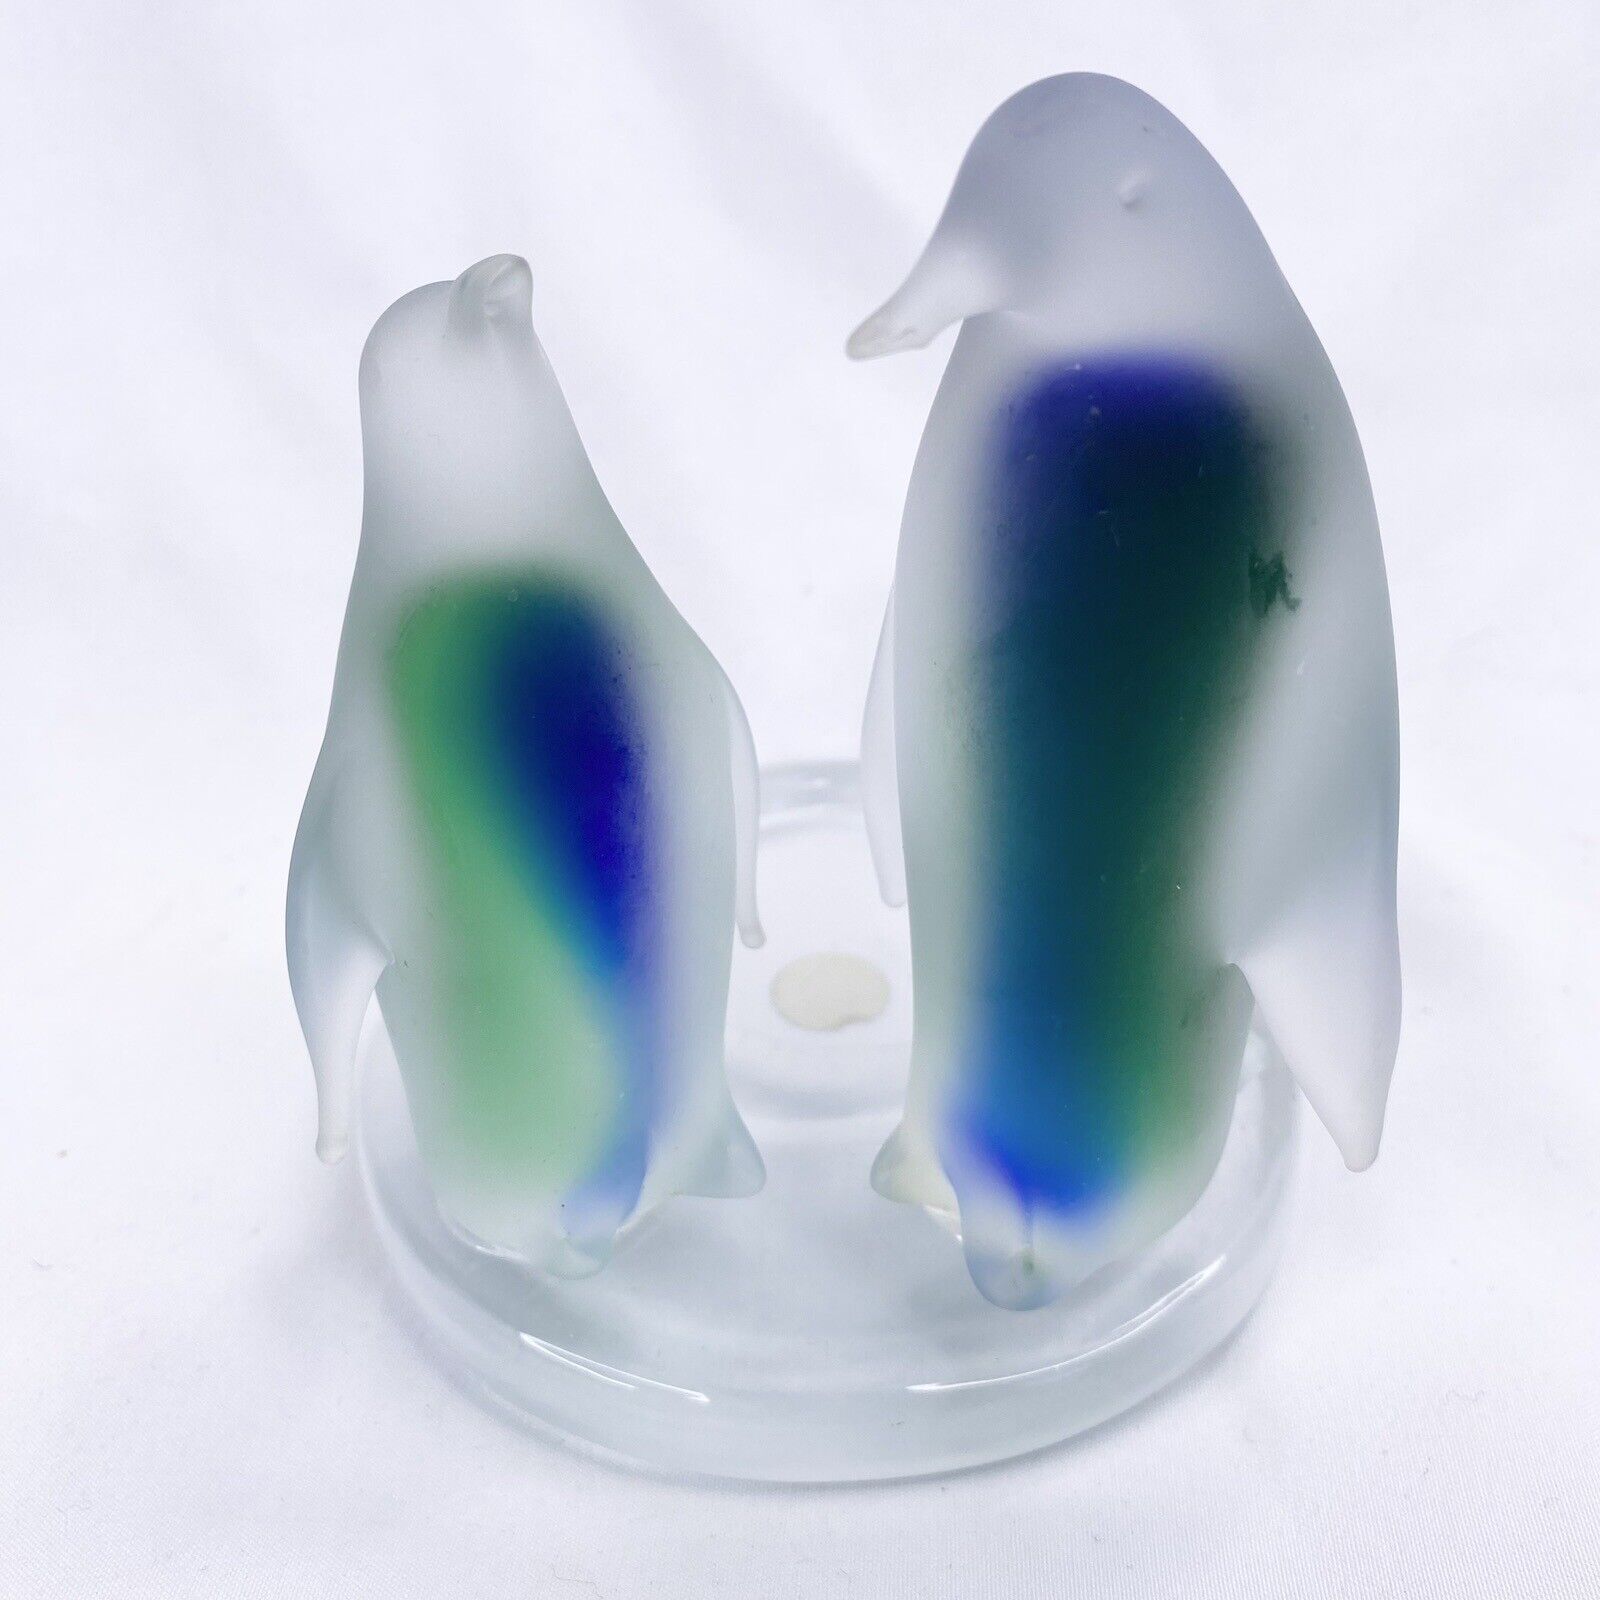 Penguin Tealight Candle Holder Party Lite Frosted Clear Blue Green Glass Votive